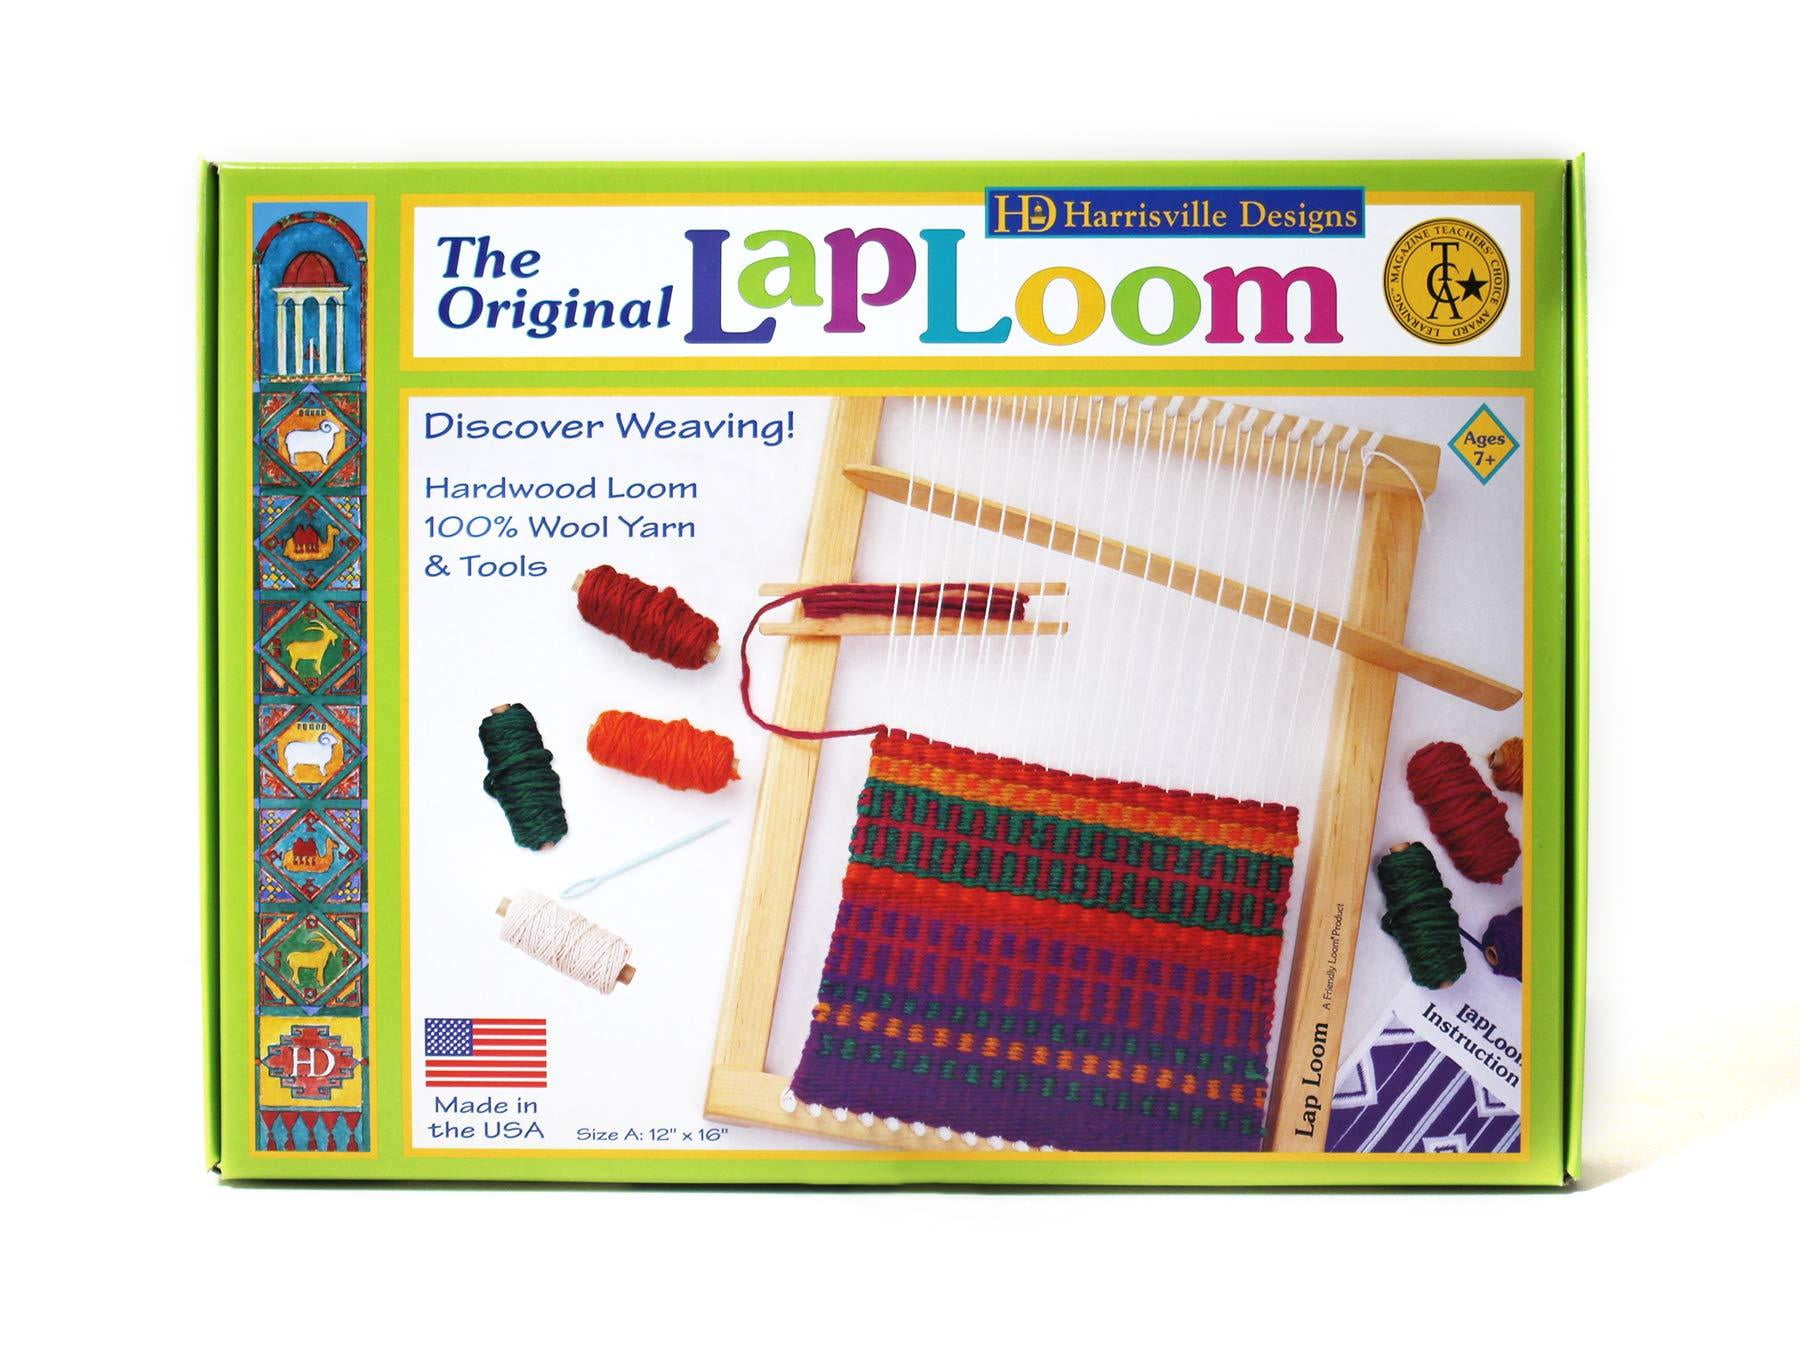 Harrisville Designs Lap Loom (Style A) Style A 